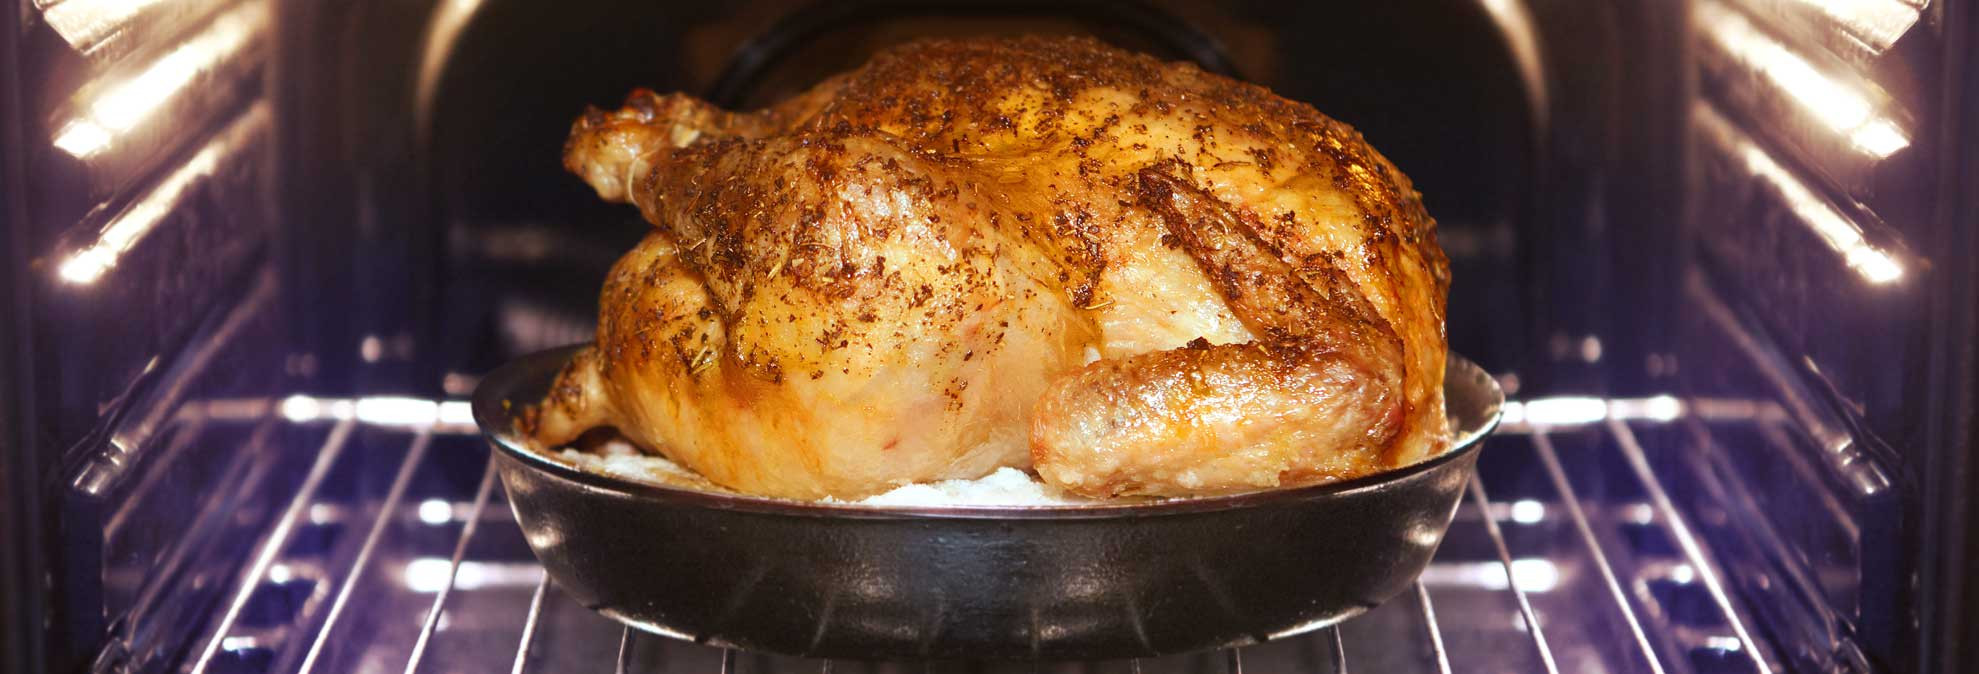 Best Way To Cook Thanksgiving Turkey
 The Best Way to Cook a Turkey Consumer Reports